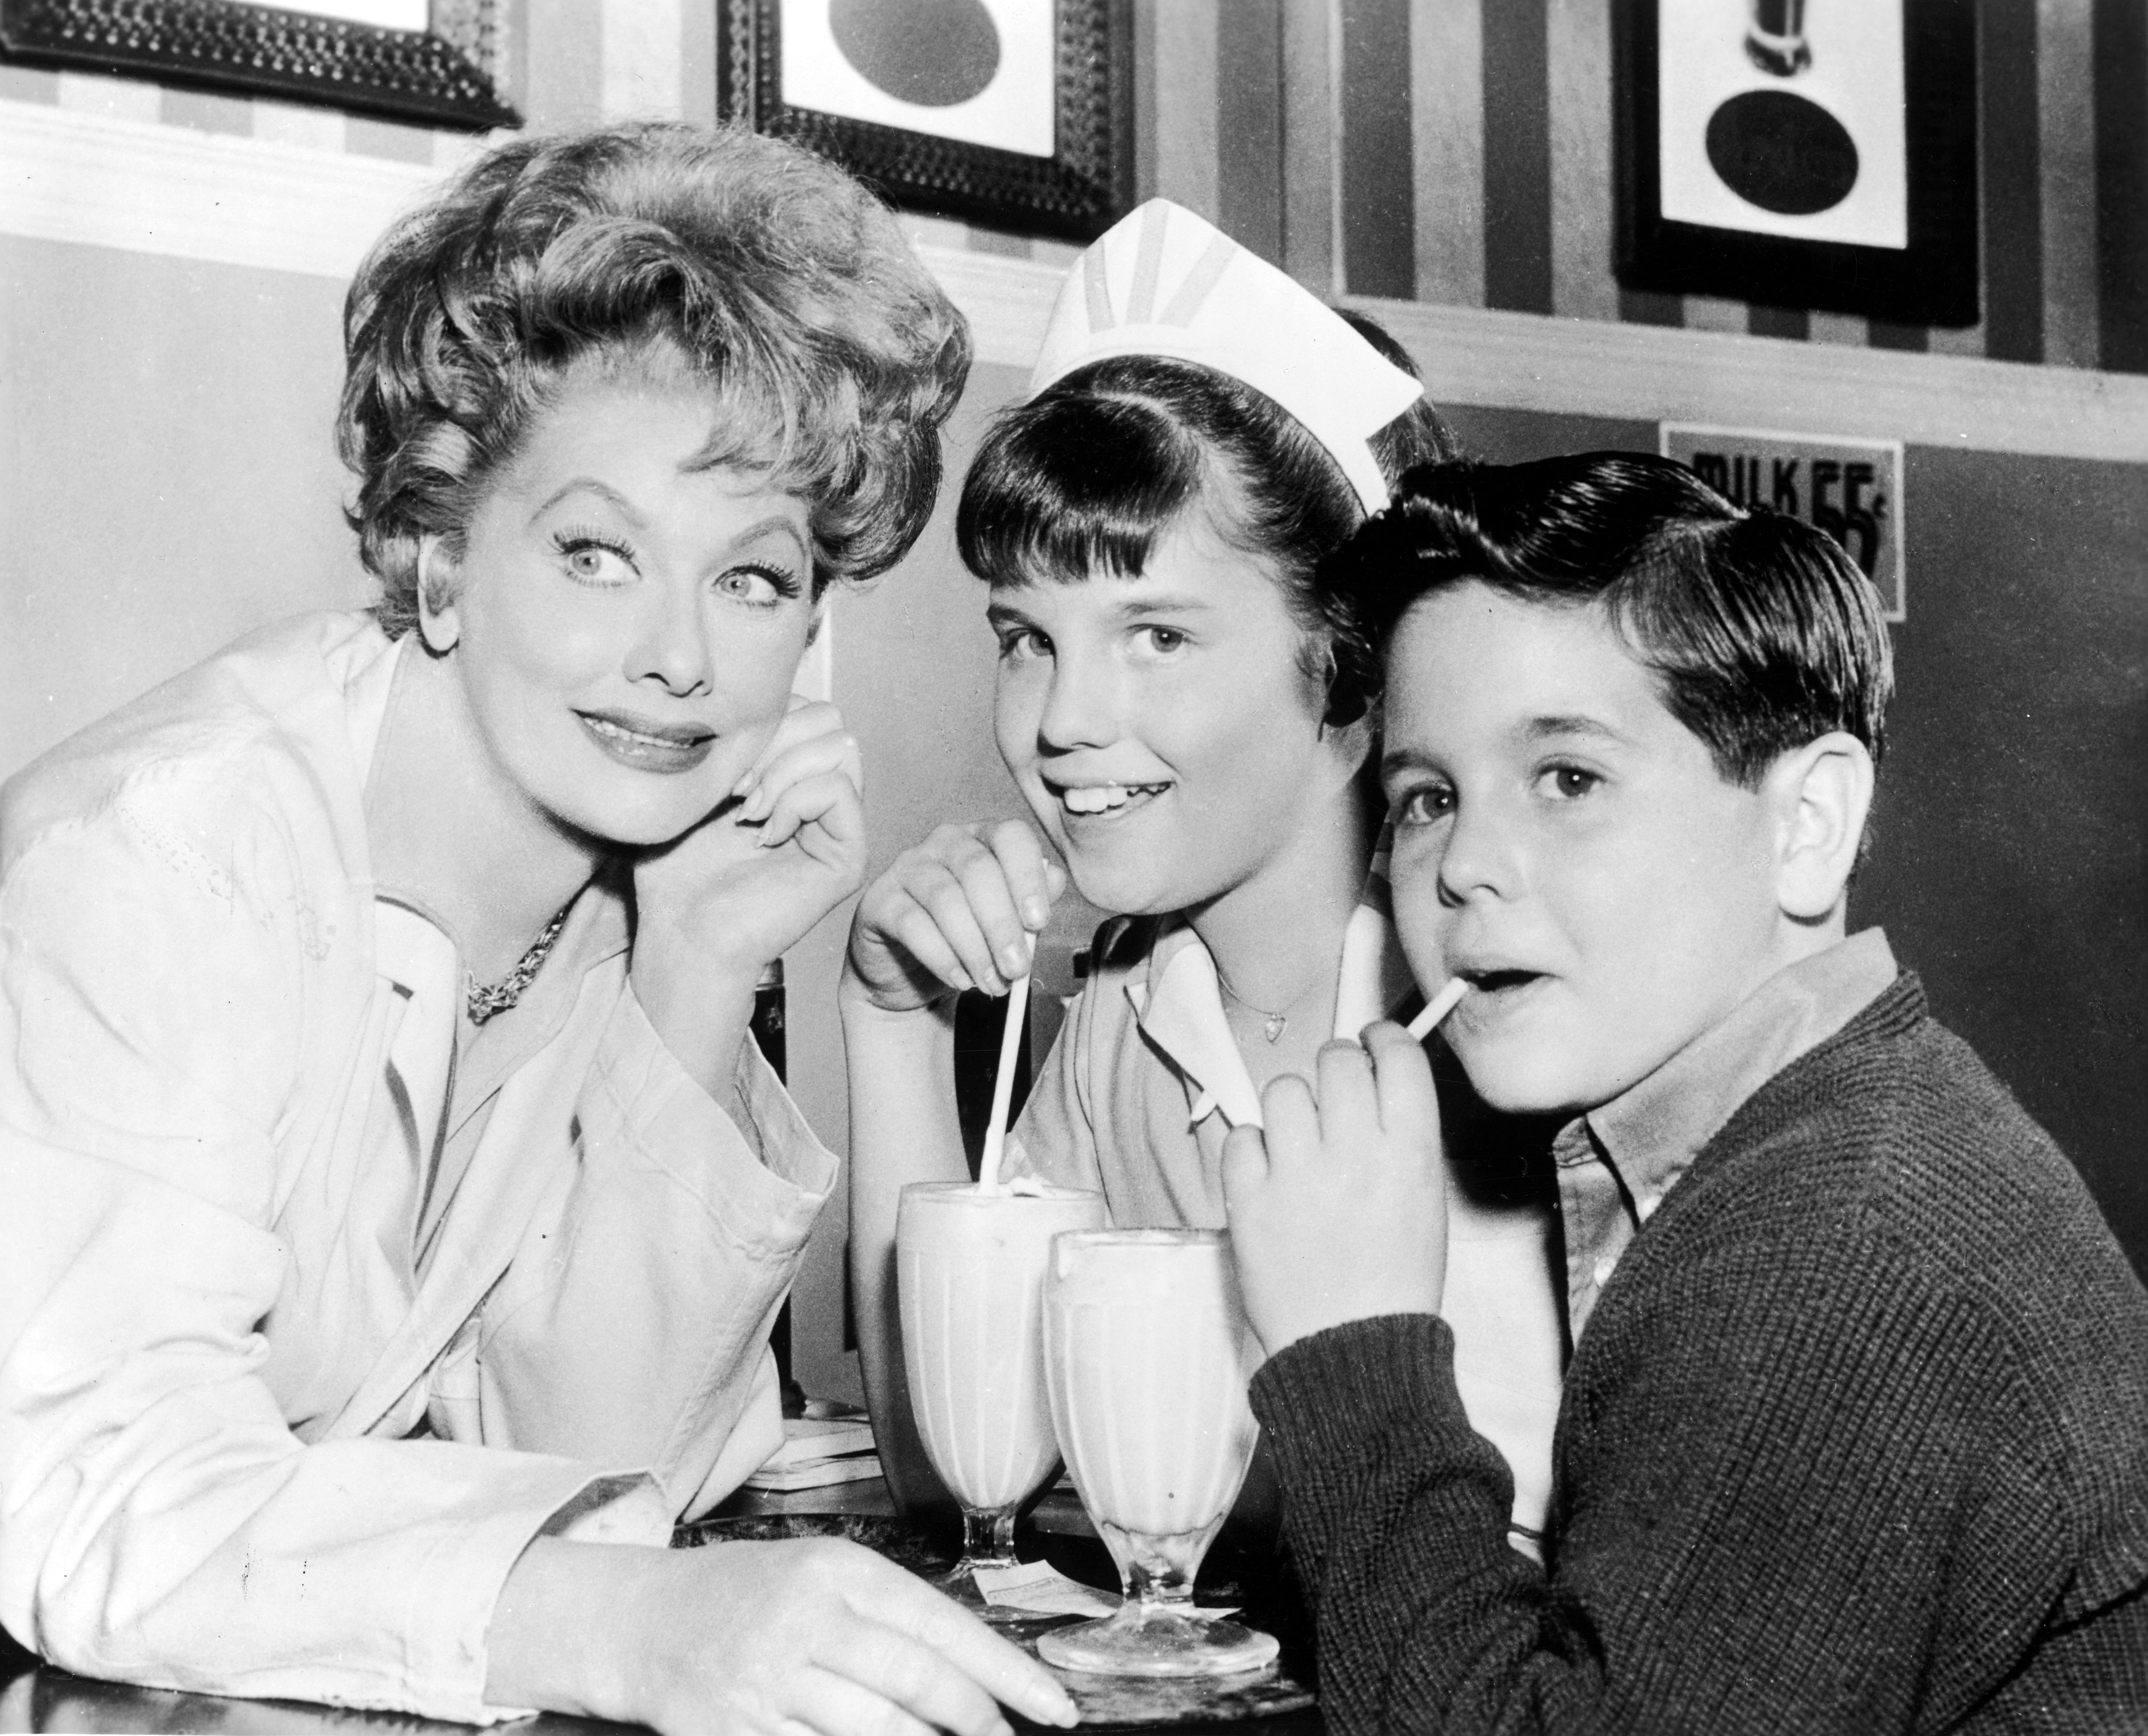 American actress Lucille Ball with her children, Lucie Arnaz and Desi Arnaz, Jr., 1962. Desi was at the time making an appearance on ‘The Lucy Show’